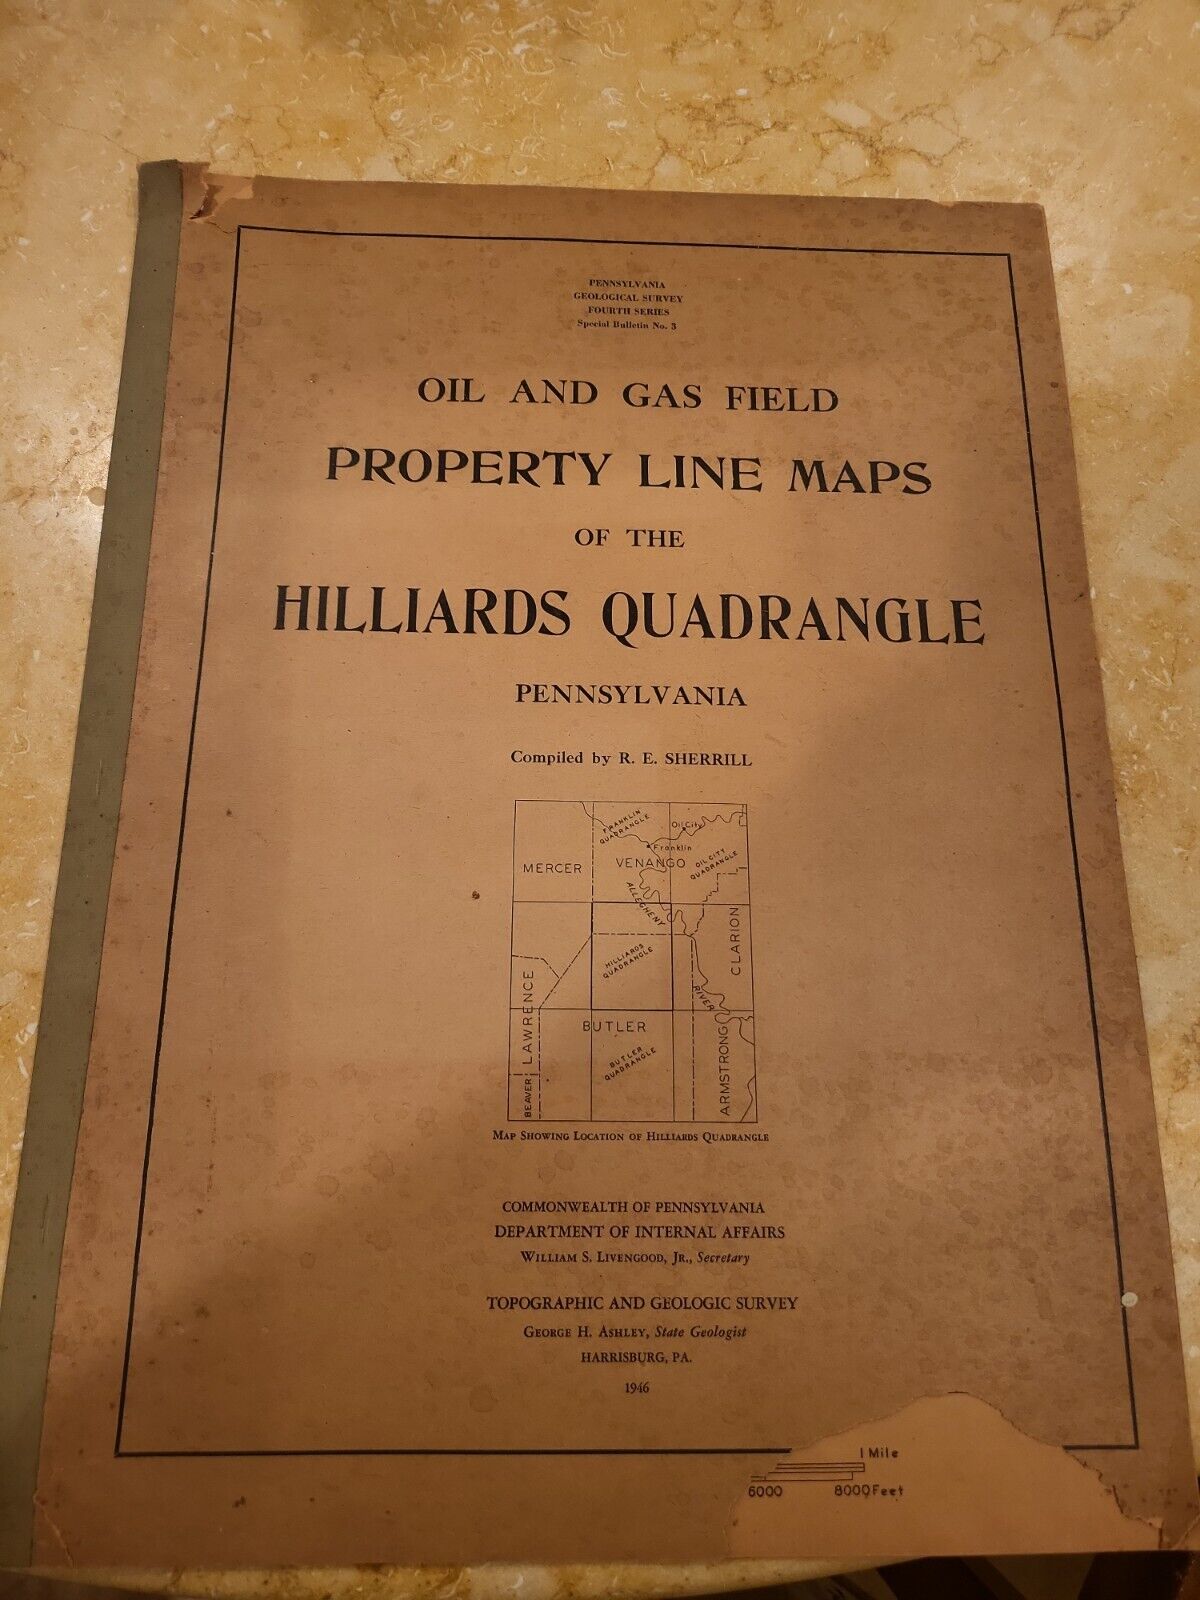 Oil and Gas Field Property Line Maps. 1946